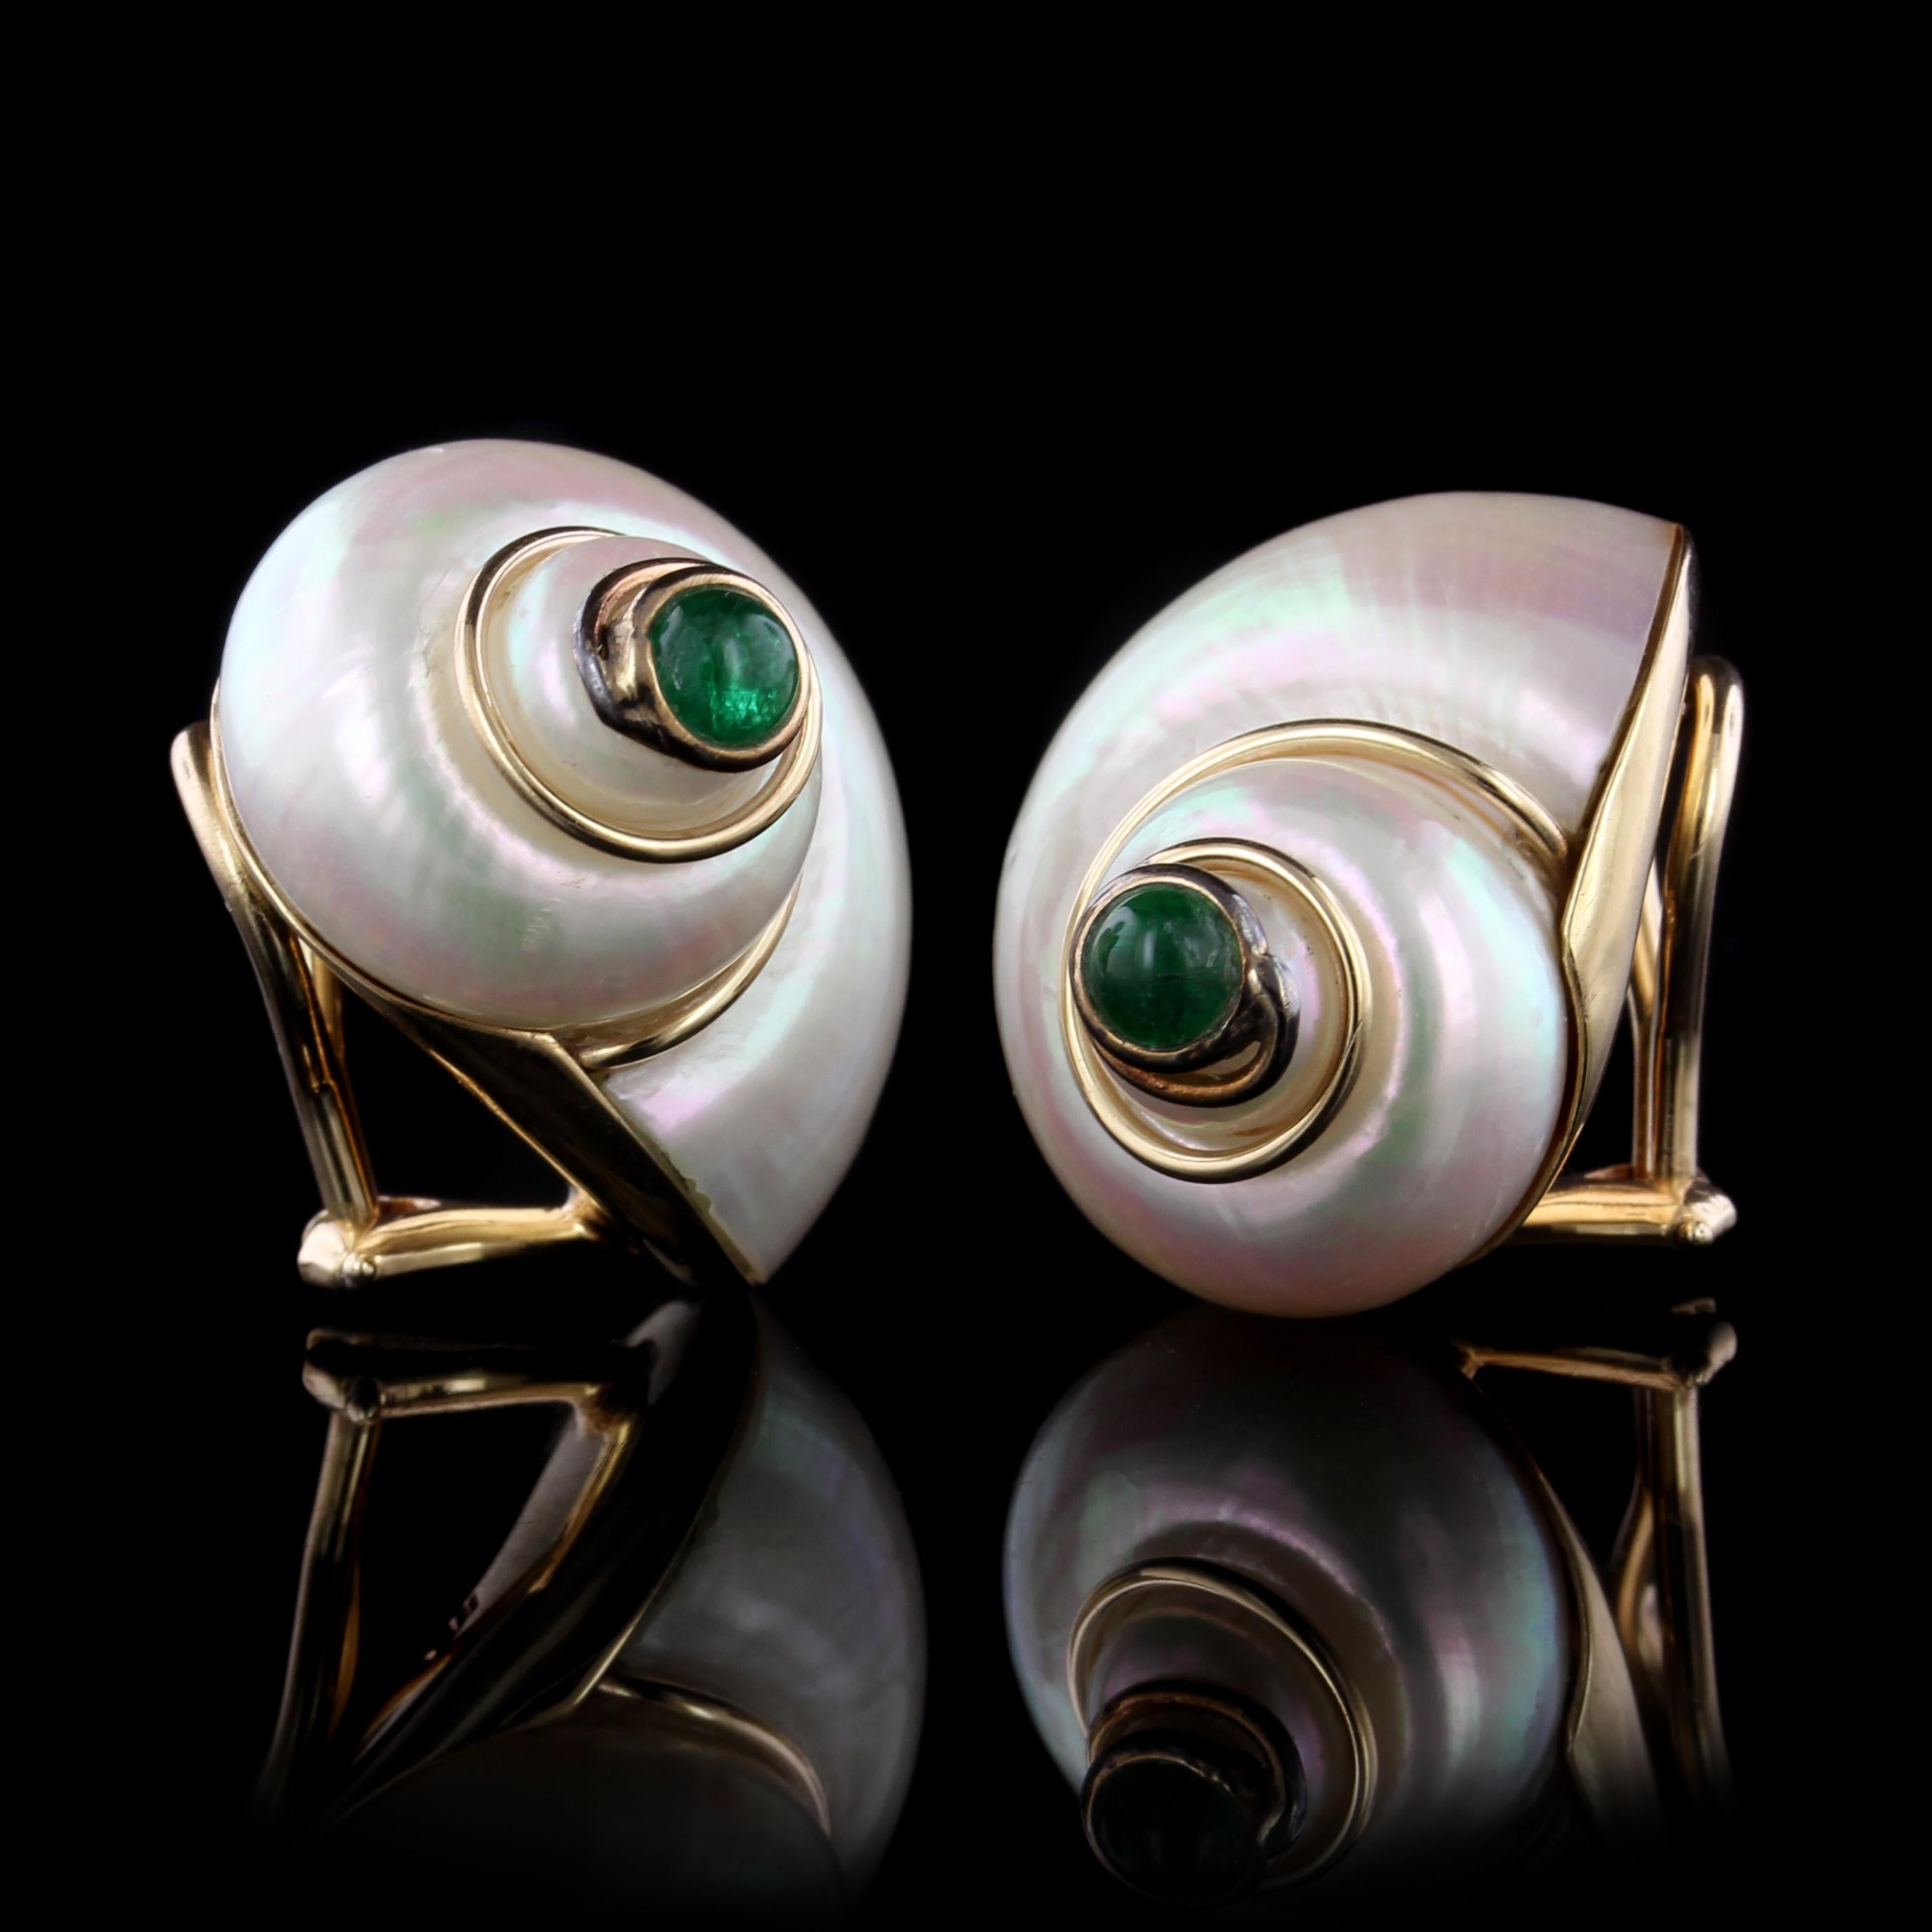 MAZ 14K Yellow Gold Turbo Shell and Emerald Earrings. The earrings are designed
with white turbo shells bezel set with two cabochon emeralds each measuring
4.00mm., length 7/8